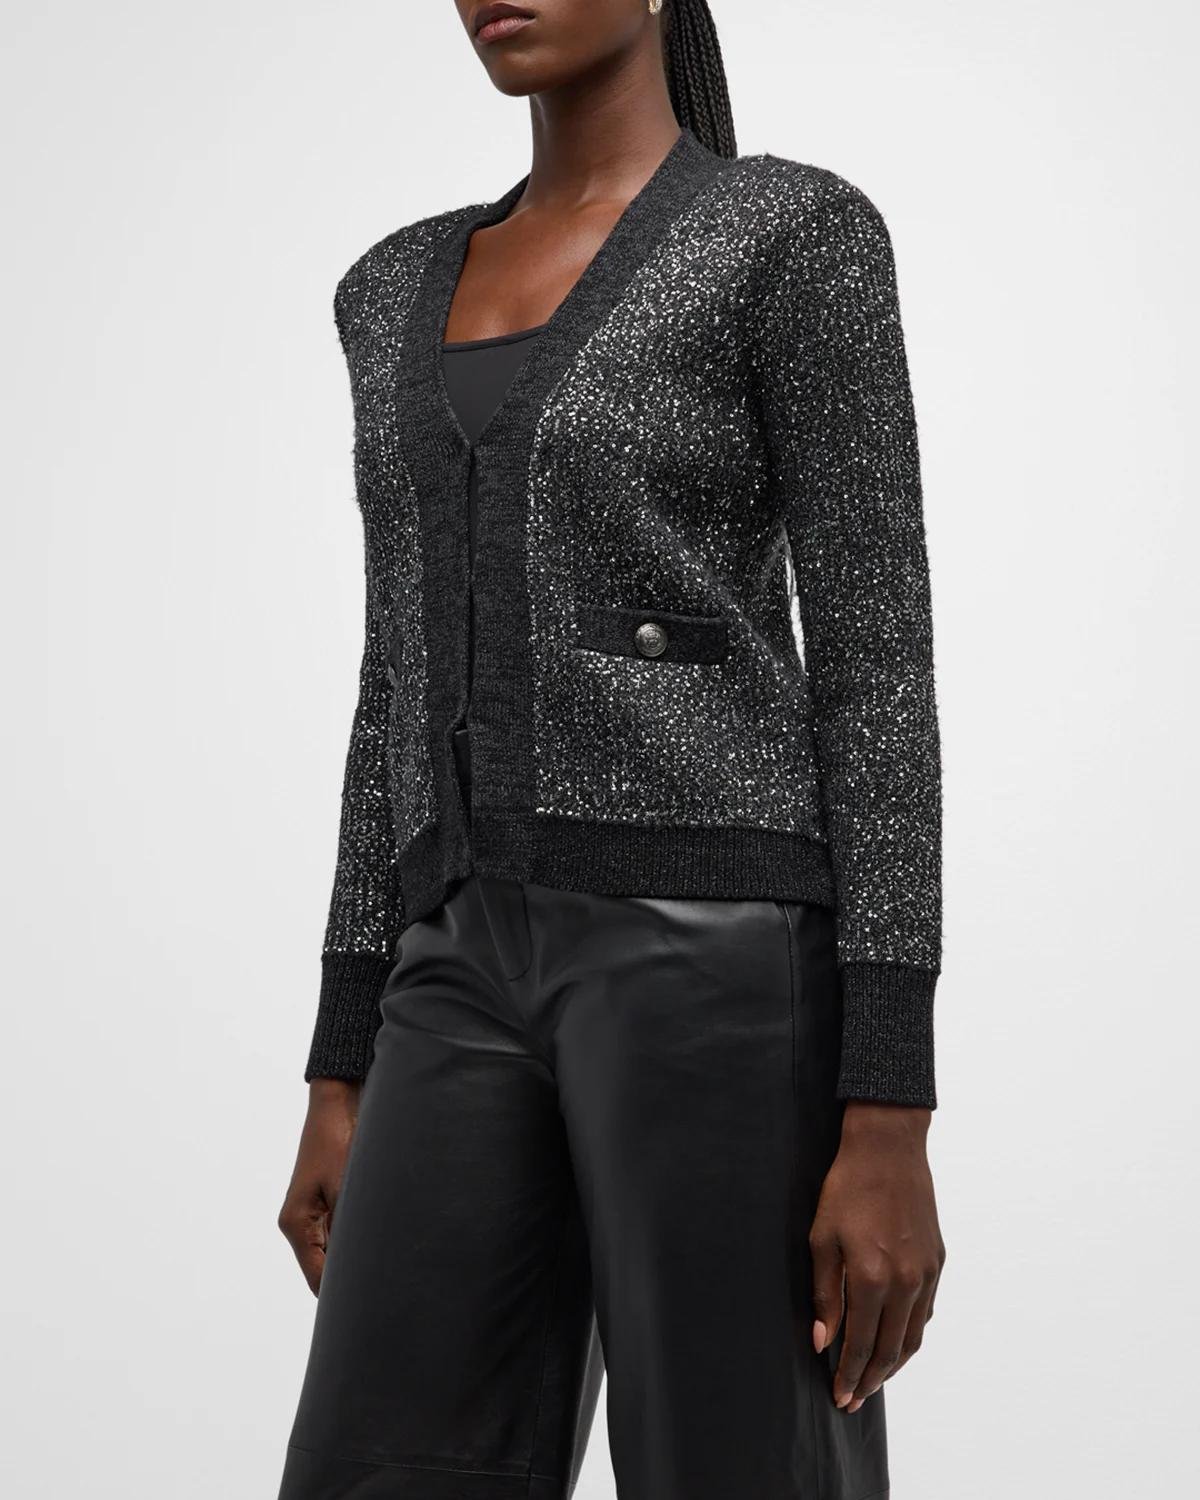 Jinny Sequin Cardigan by L'AGENCE